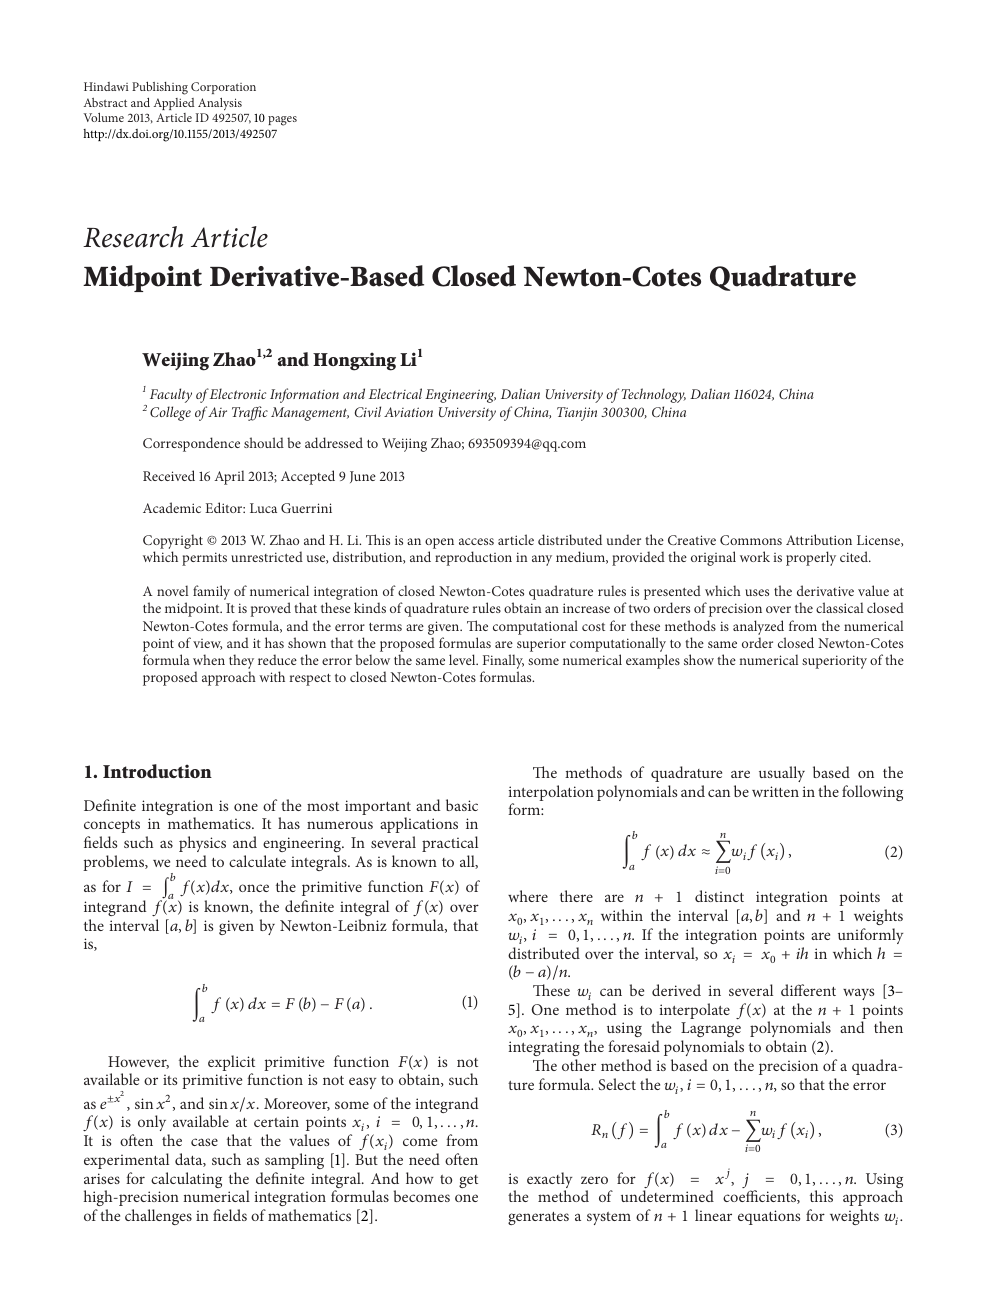 Midpoint Derivative Based Closed Newton Cotes Quadrature Topic Of Research Paper In Mathematics Download Scholarly Article Pdf And Read For Free On Cyberleninka Open Science Hub